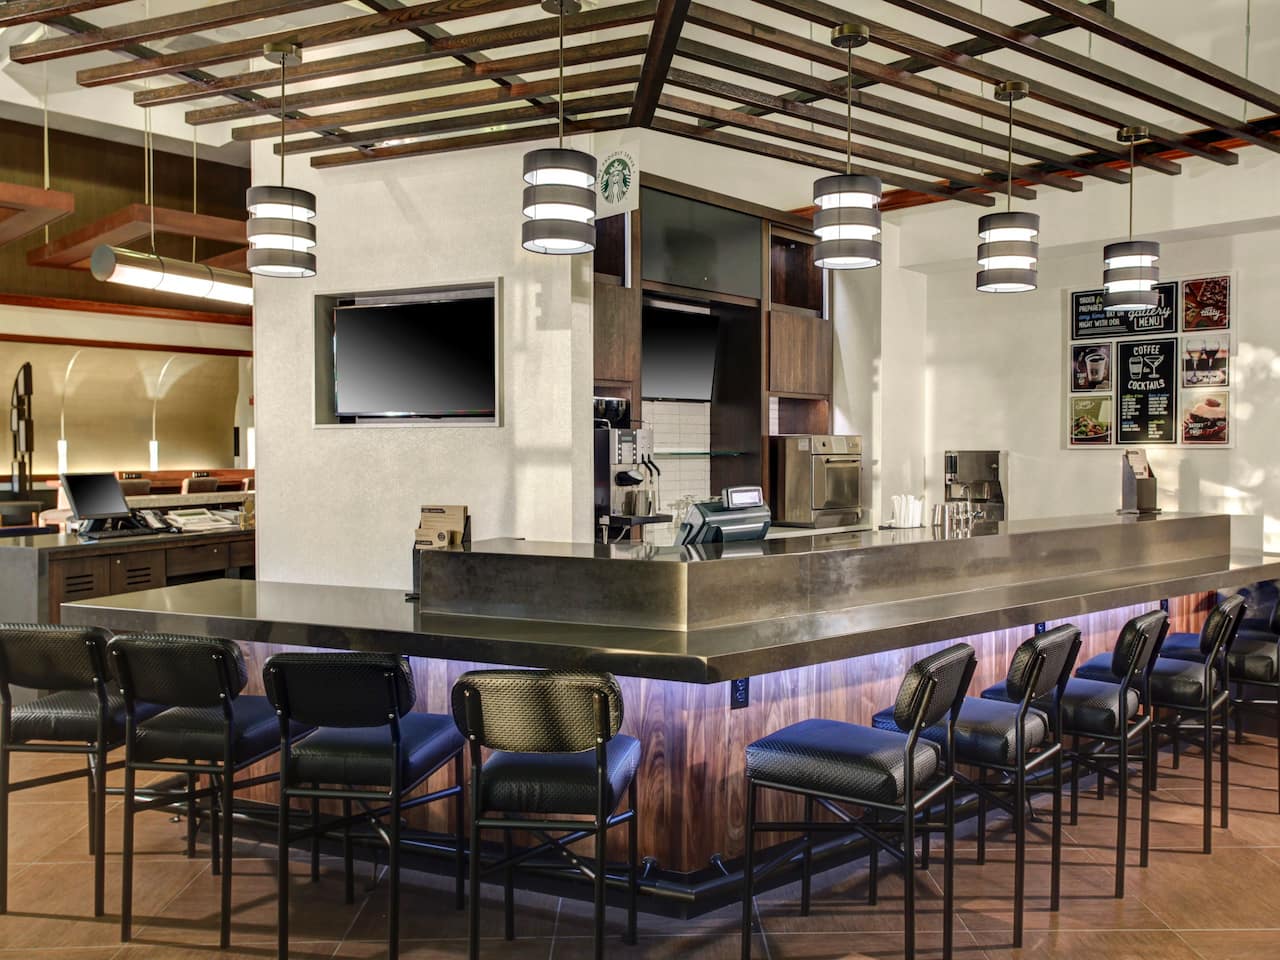 On-Site The Placery is our onsite bar at our Hyatt Place Albuquerque Airport hotel